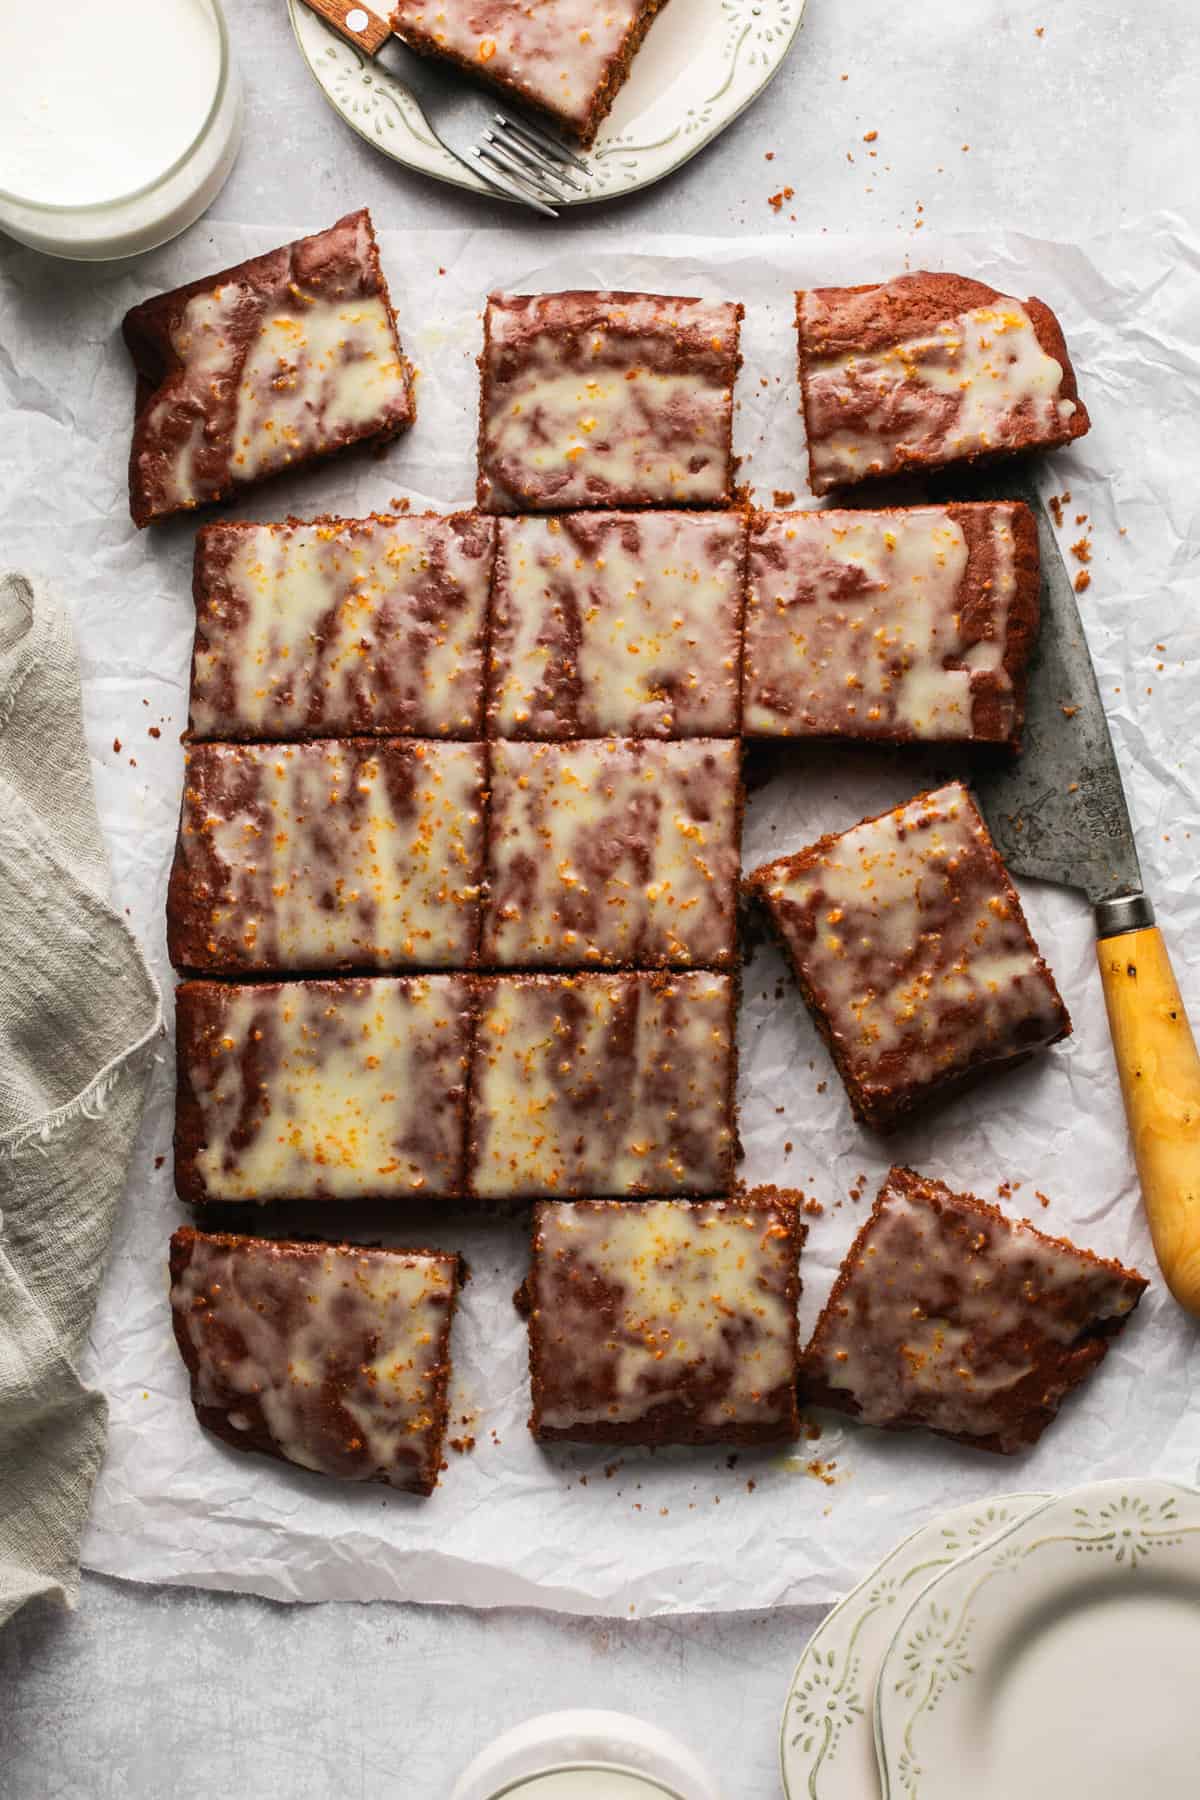 gingerbread cake with orange glaze cut into squares with knife on table